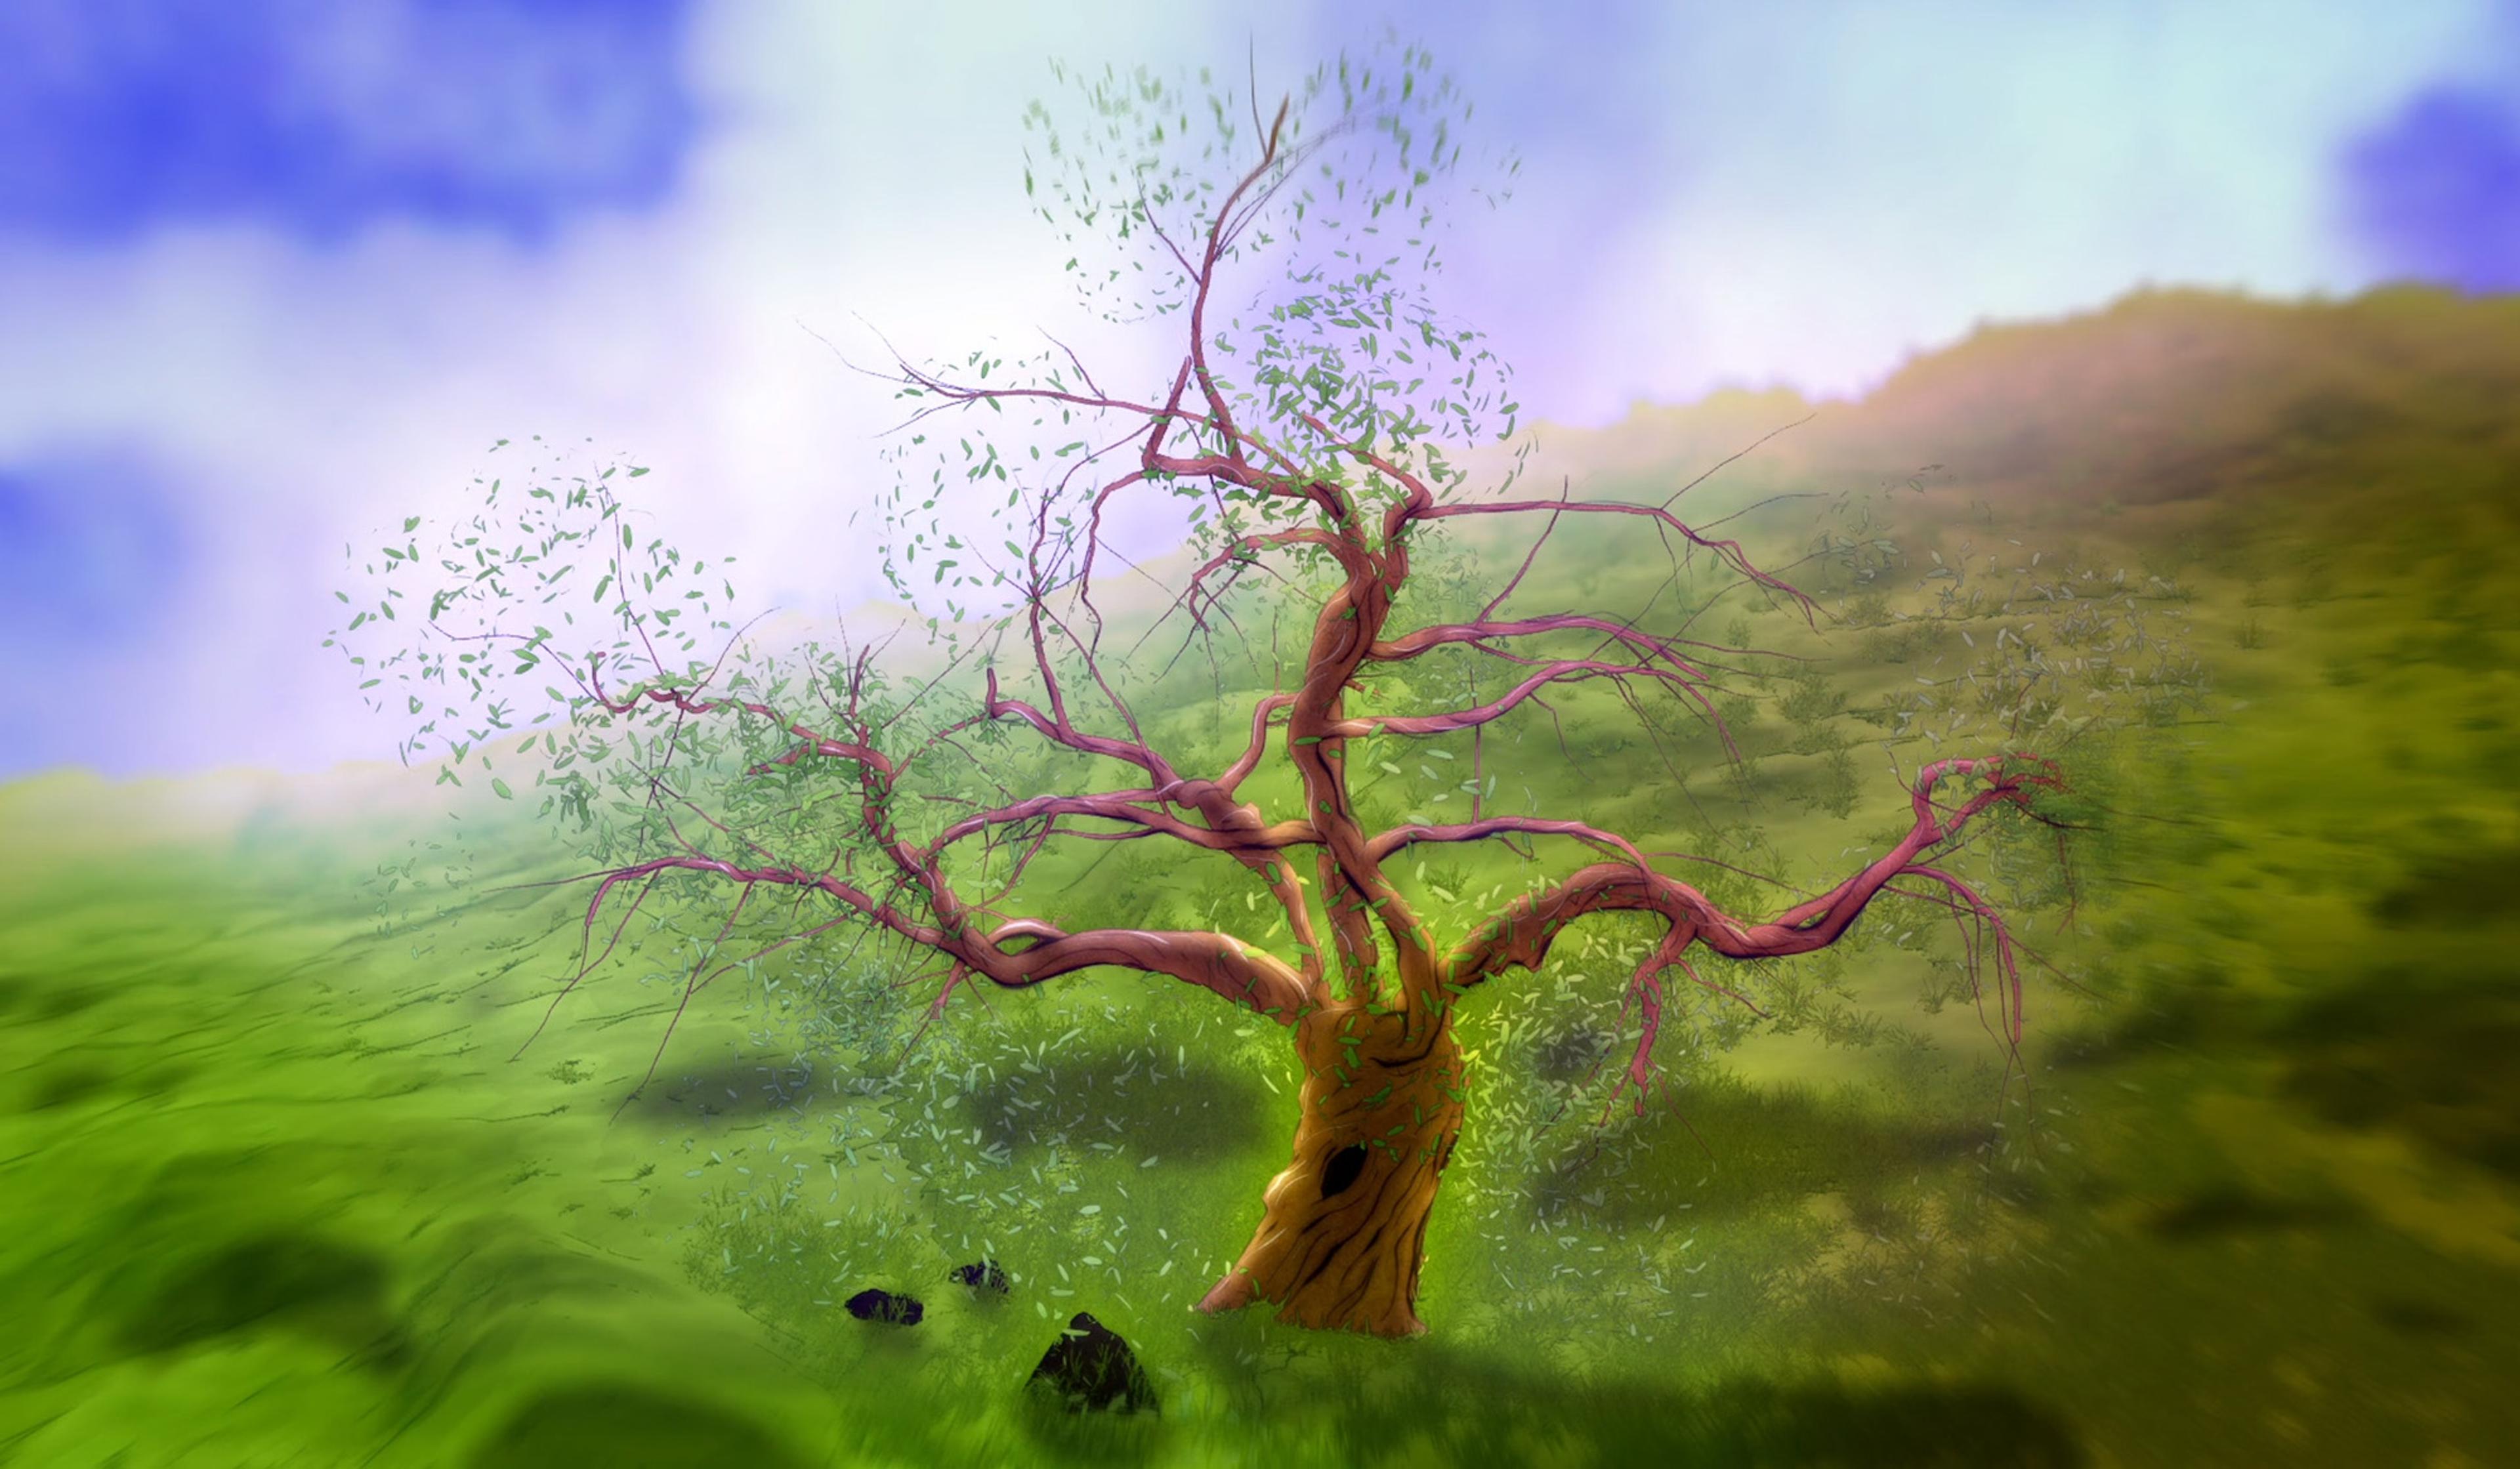 A digital illustration of an ancient, twisted tree with sparse green leaves, set against a misty, green landscape and a bright, cloudy sky.